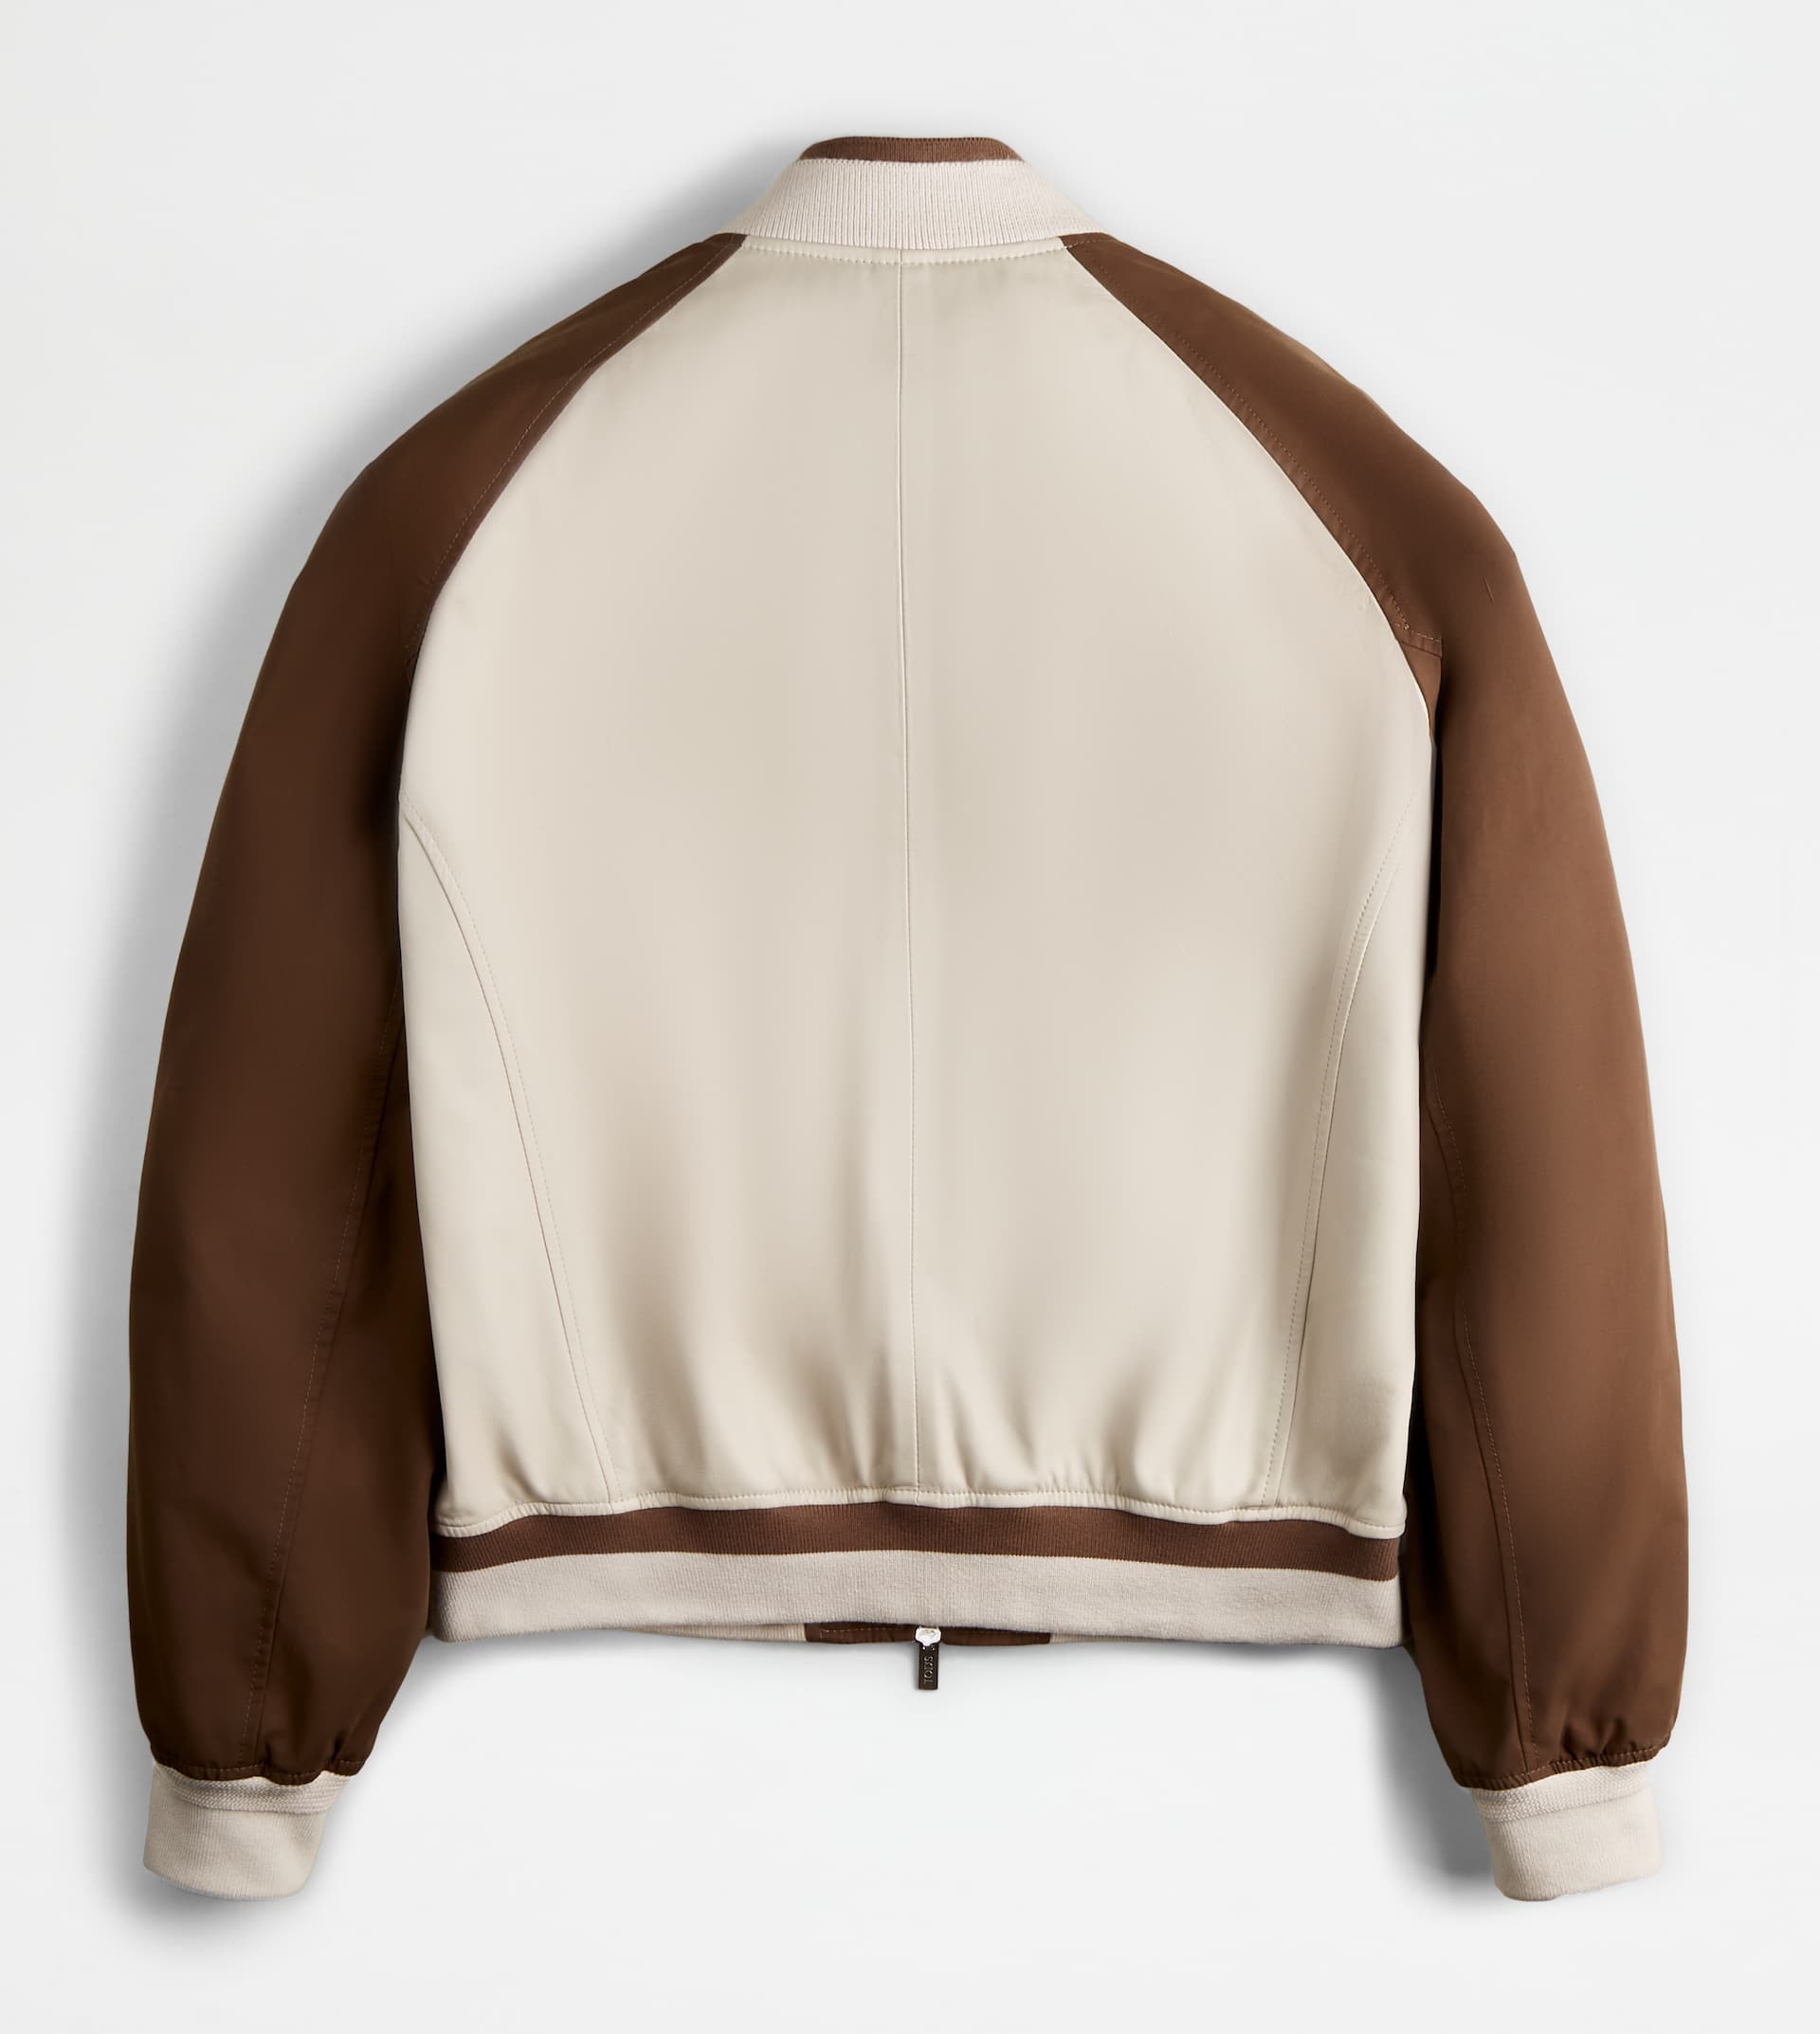 BOMBER JACKET IN LEATHER - BROWN, OFF WHITE - 7